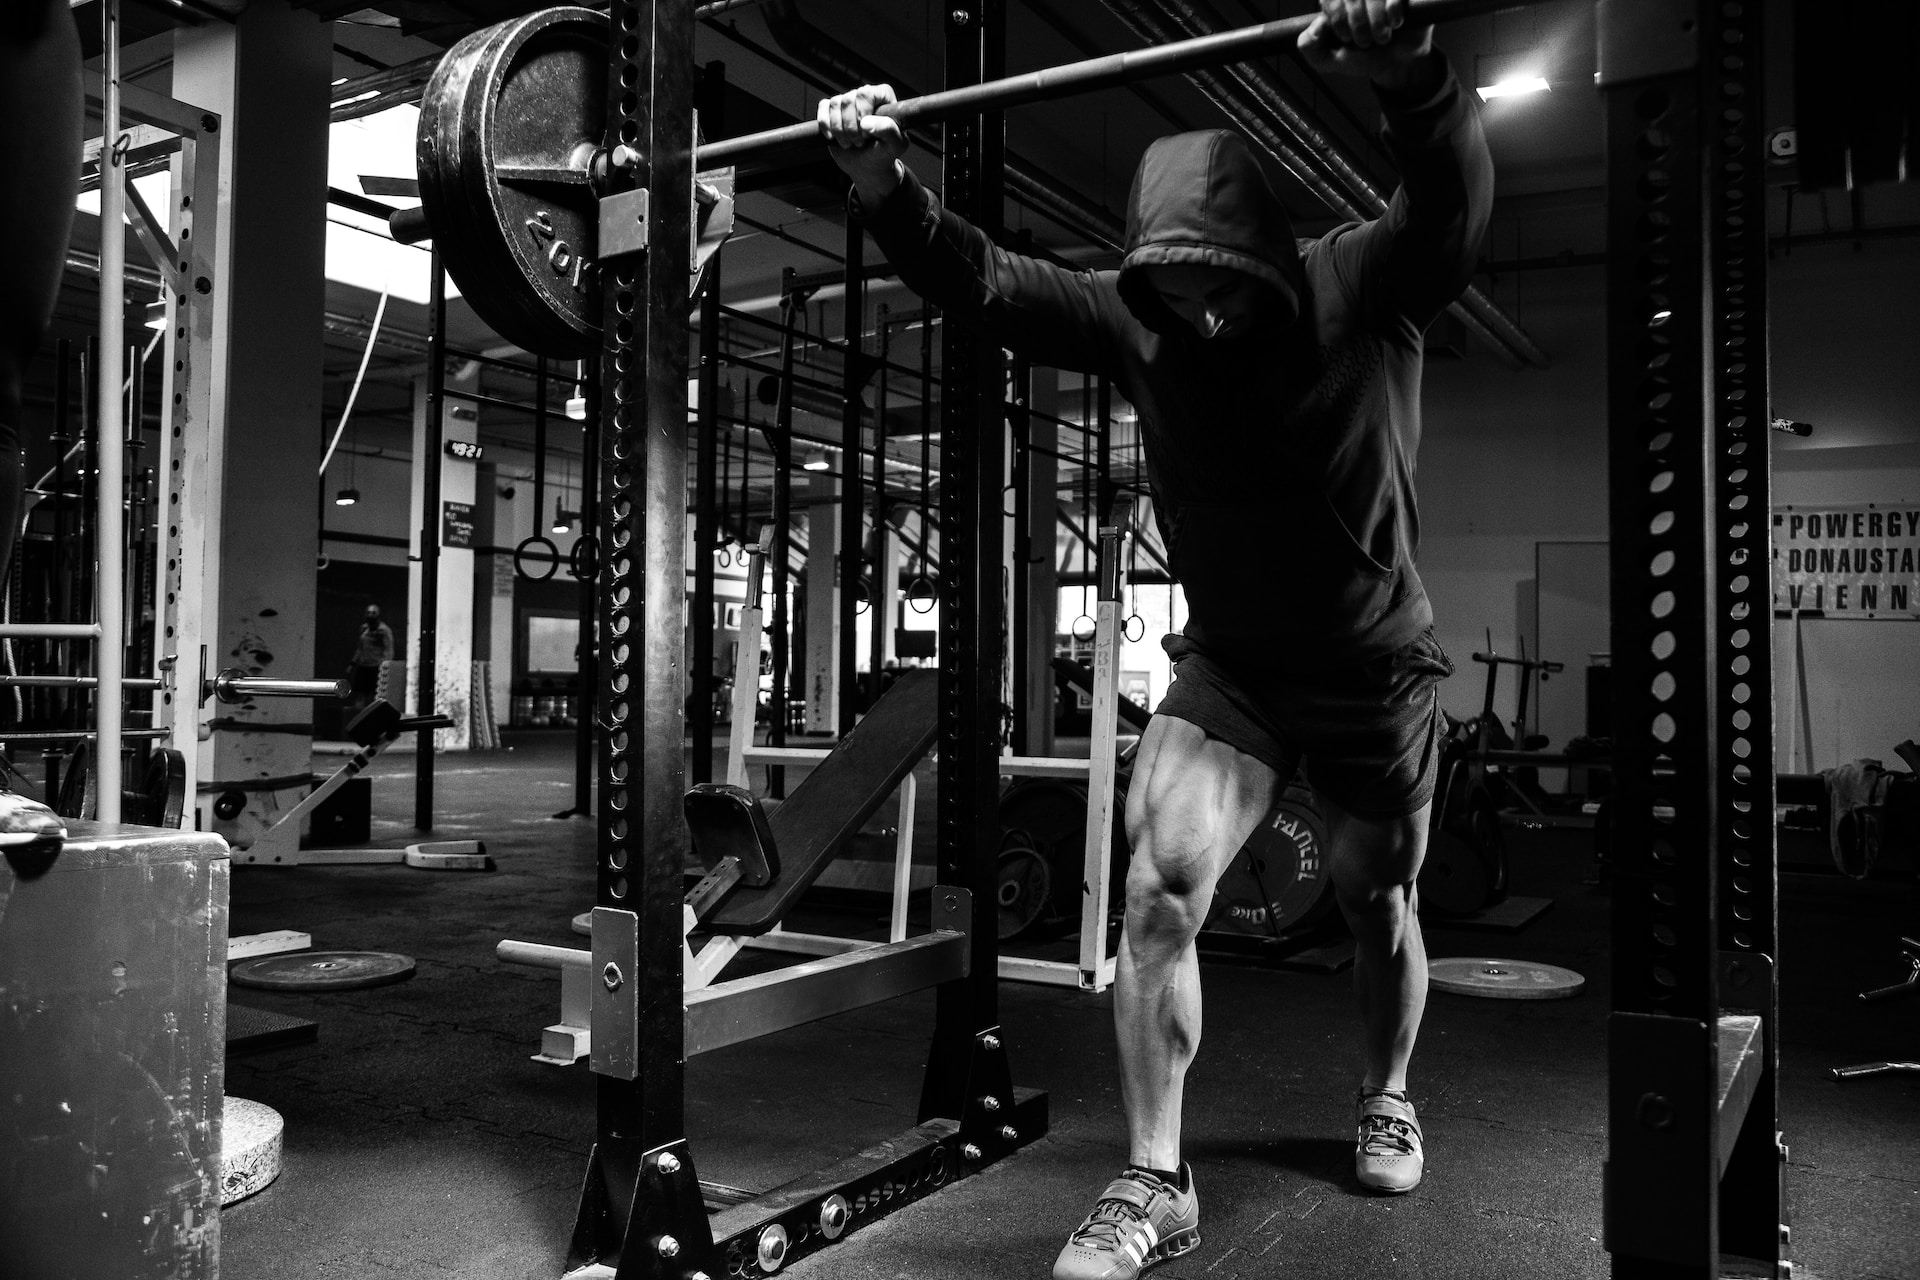 Maximize Your Workout 30-Minute Full Body Strength Training Routine